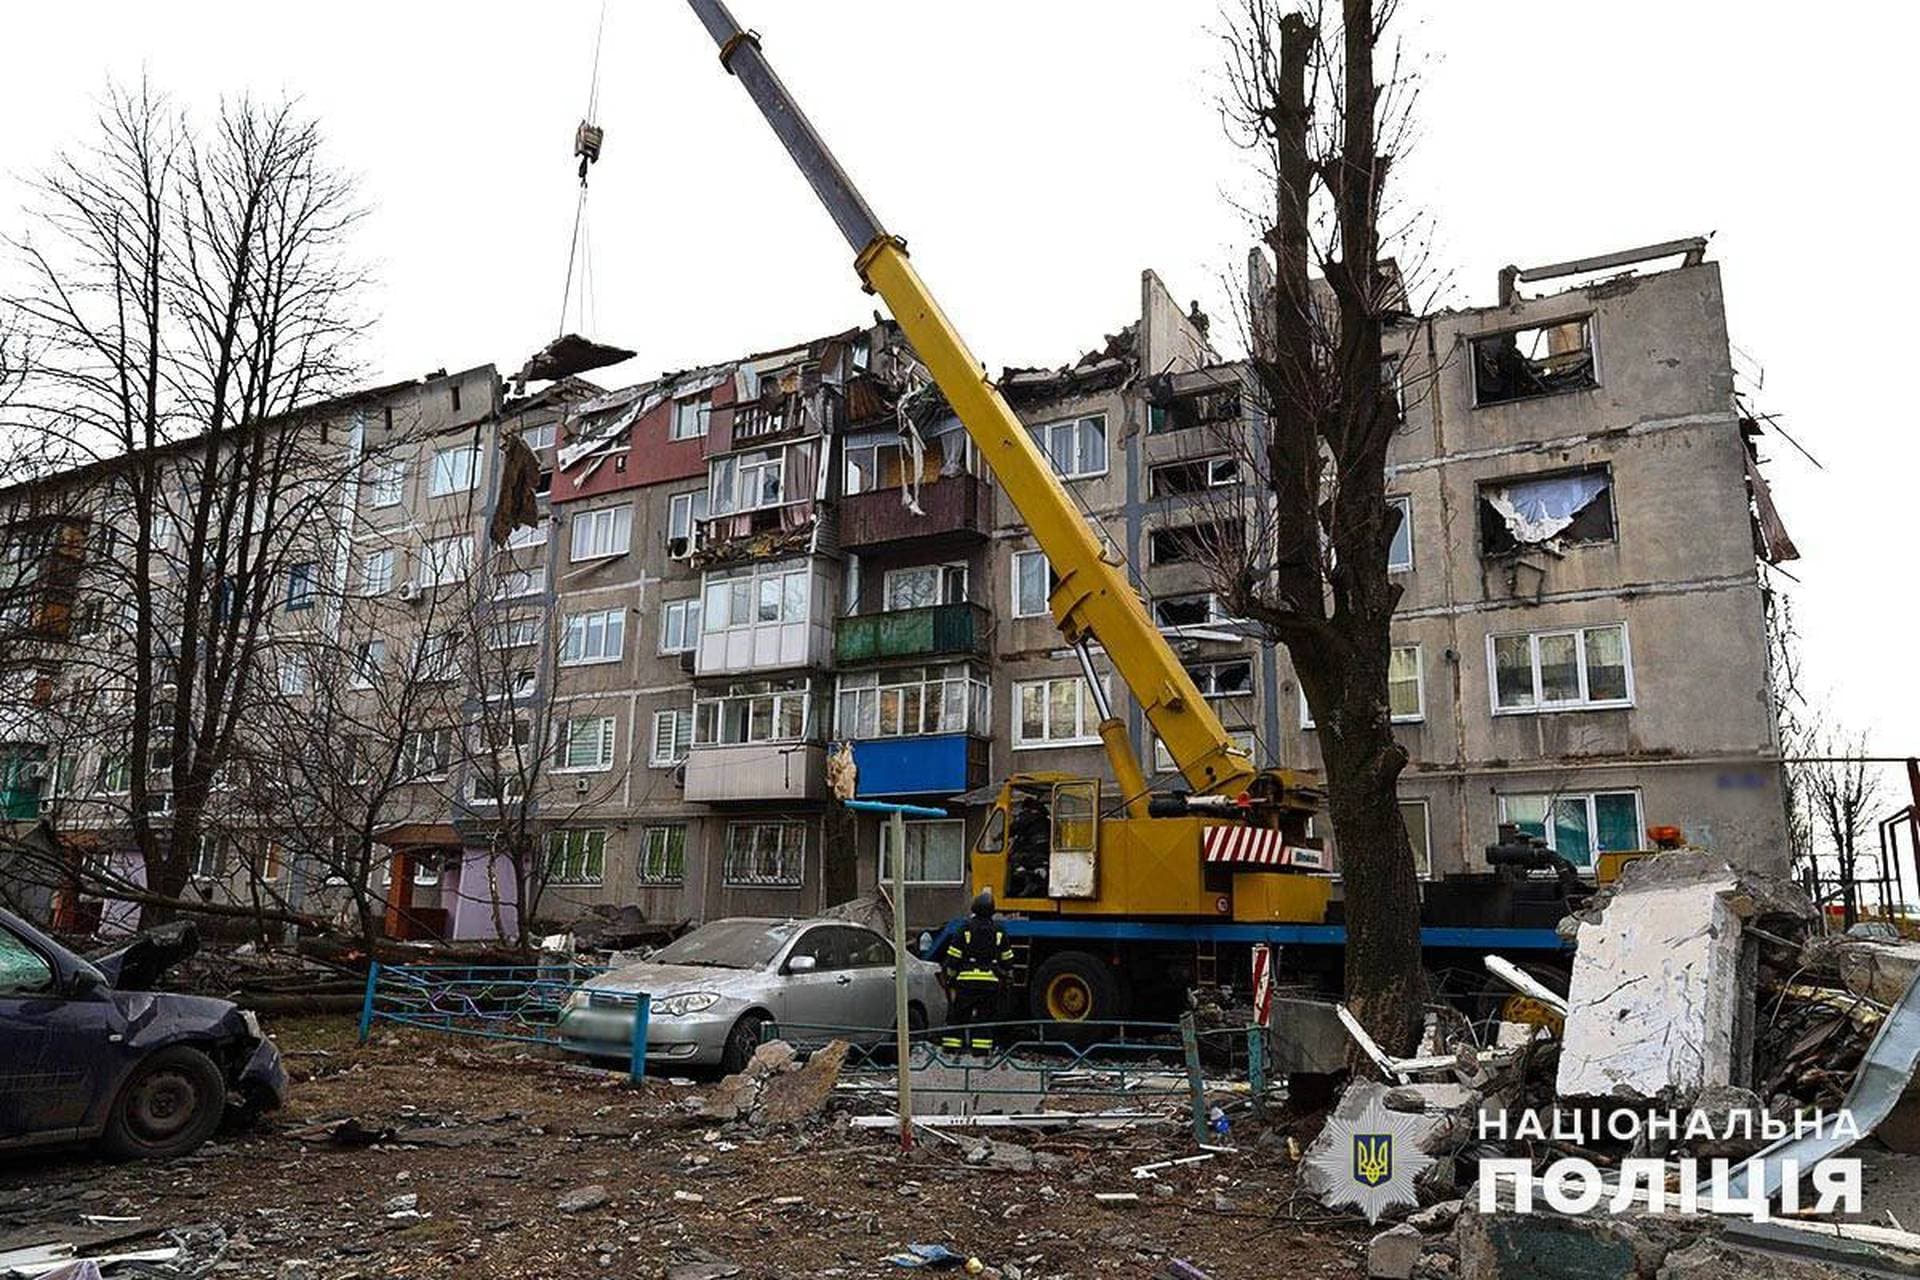 the consequences of the 'Grim-E1' bomb hitting a five-story building in Myrnograd